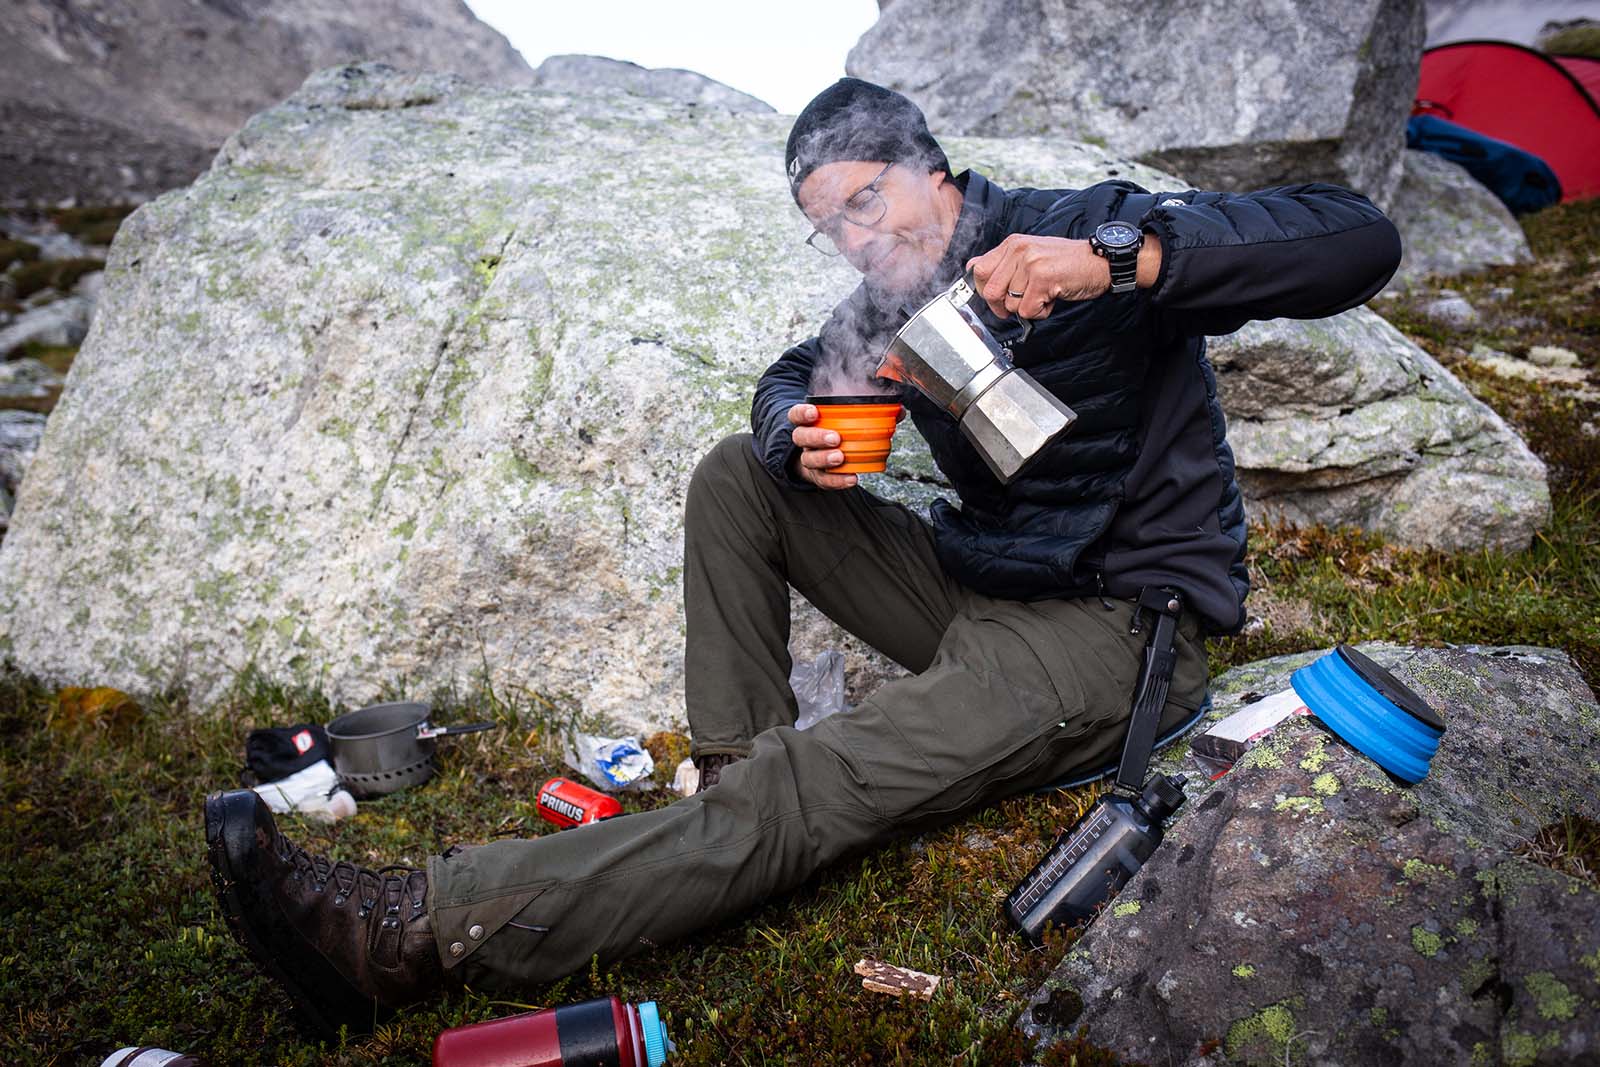 Taking a rest stop on the edge of the Tasermiut Fjord with a cup of coffee